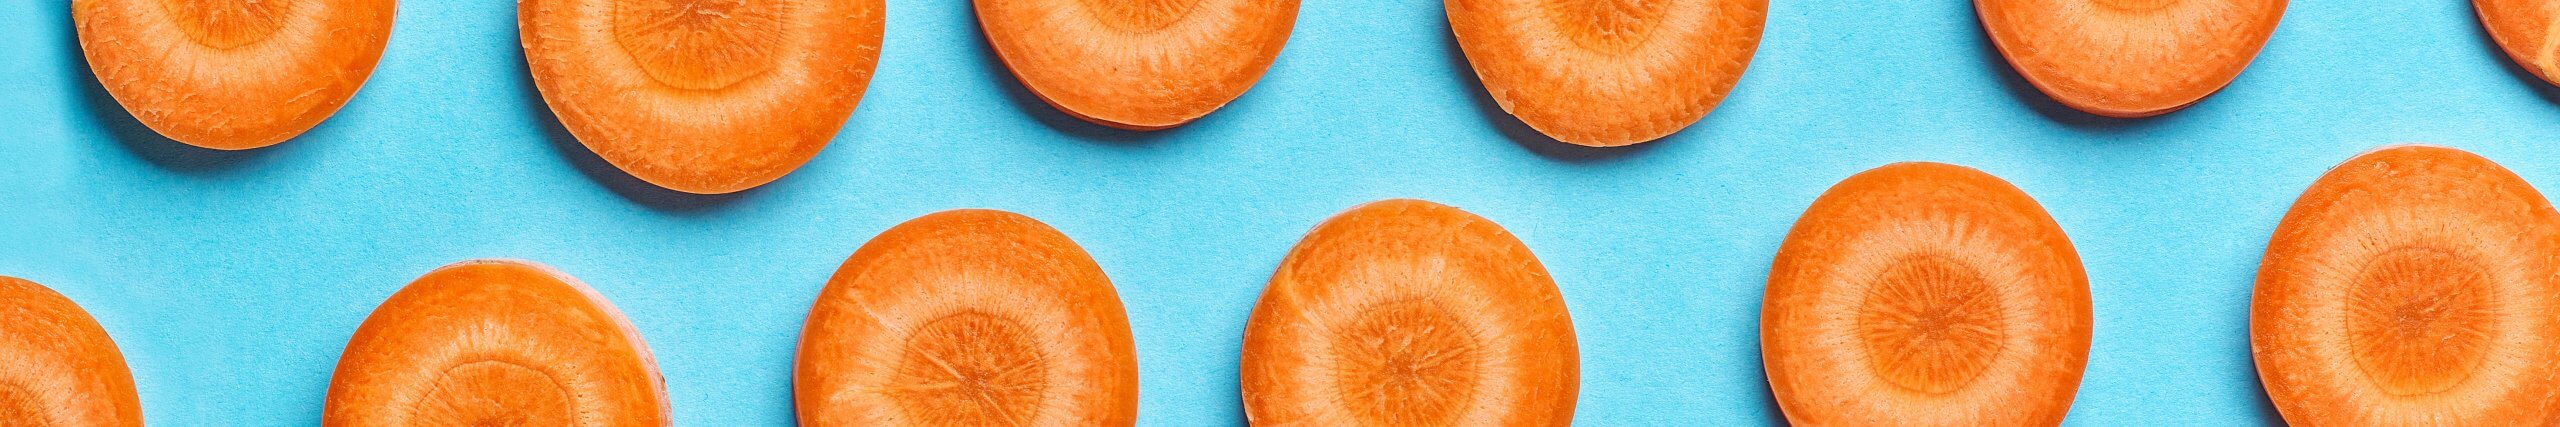 Sliced carrots against a blue background